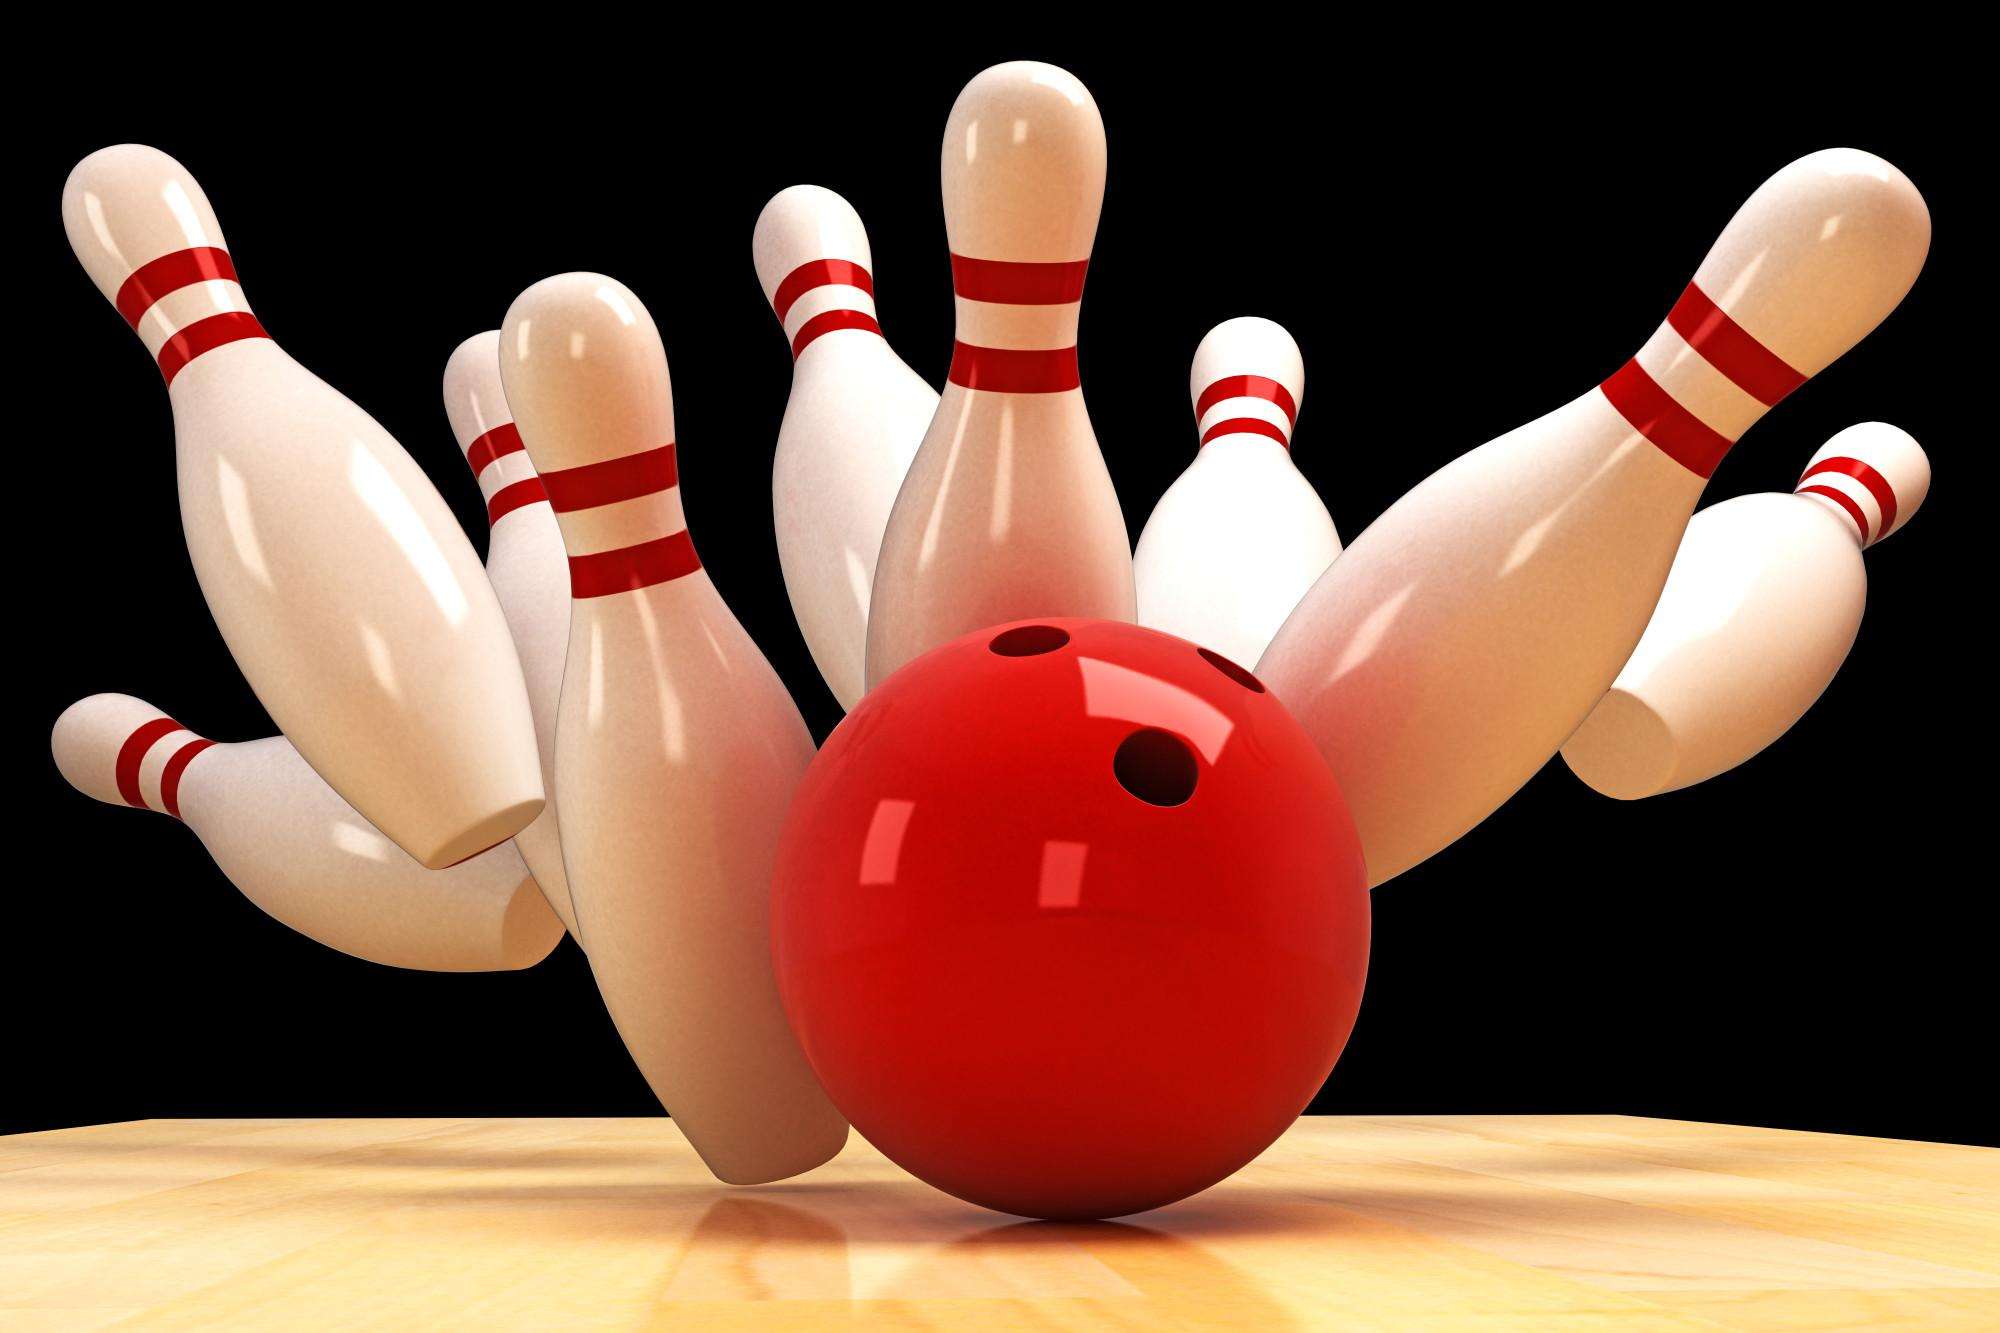 Bowling 101 A Complete Guide to the Essential Bowling Rules image